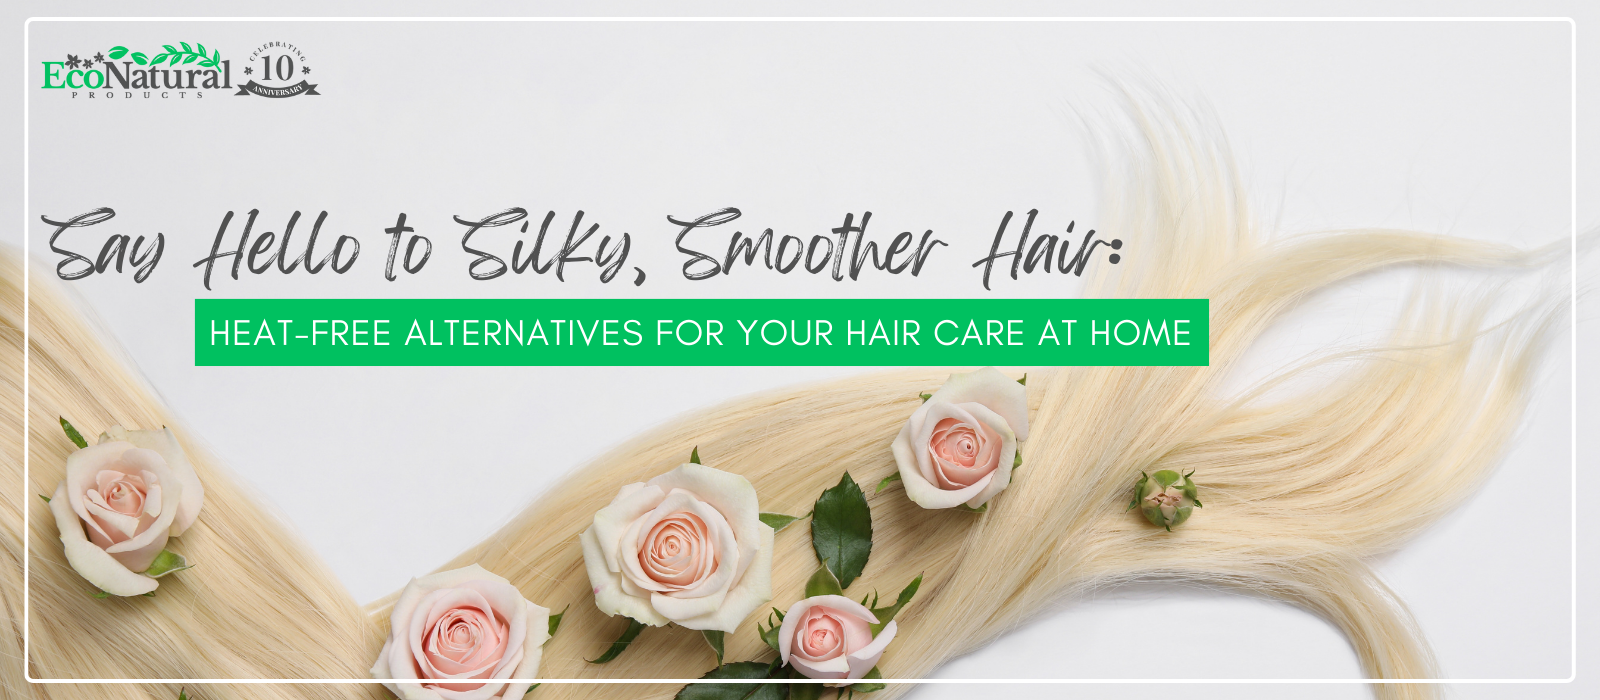 Say Hello to Silky, Smoother Hair: Heat-Free Alternatives for your Hair Care at Home